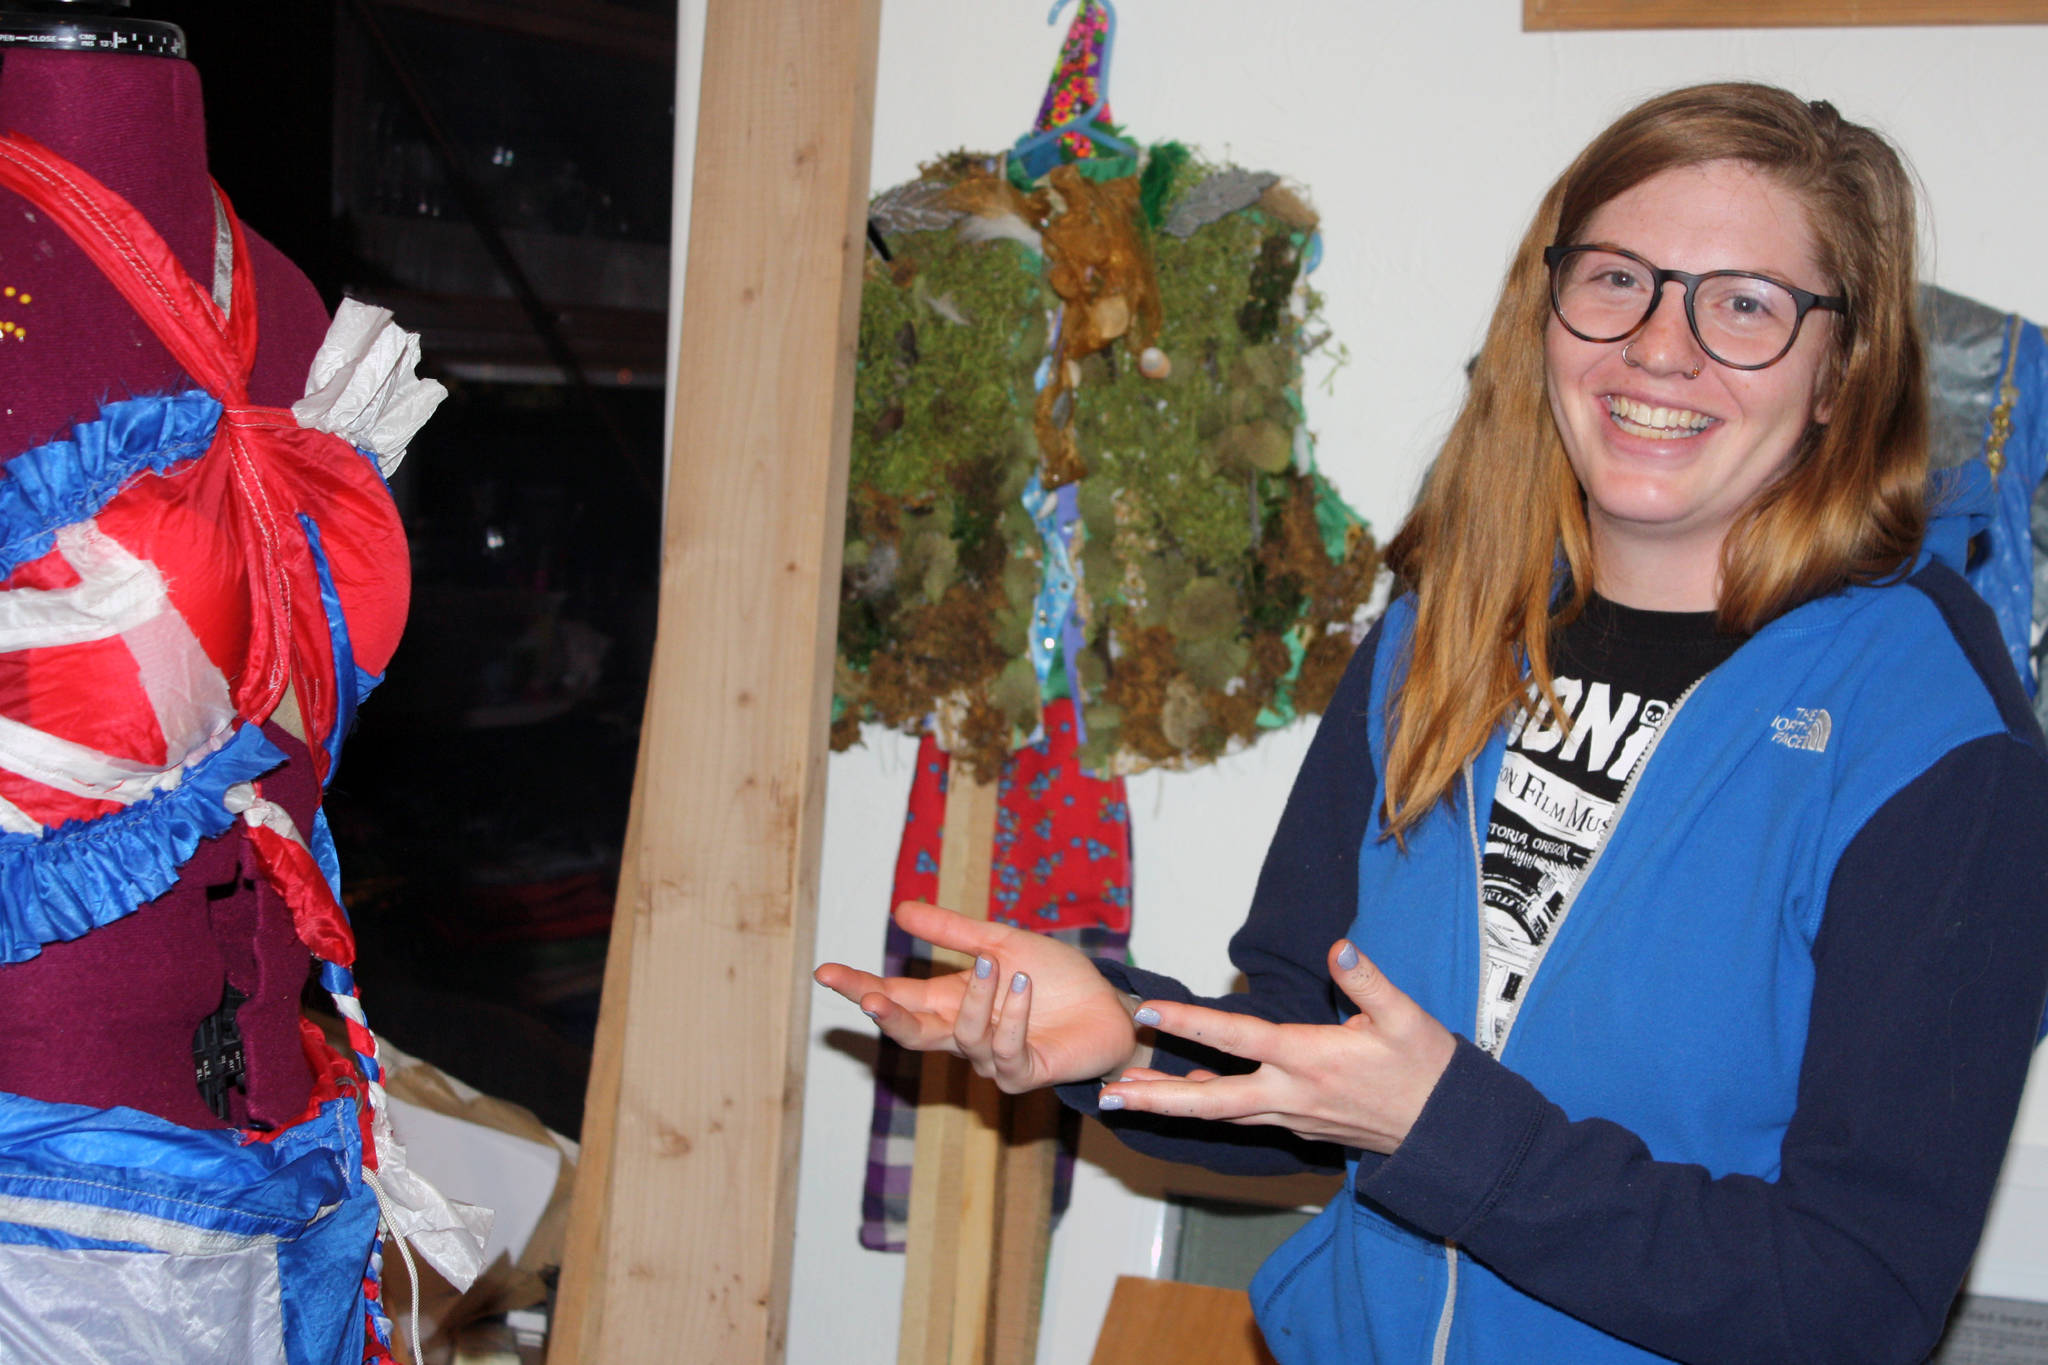 Keren GoldbergBelle gestures at her Wearable Art 2020: Joie de Vivre piece. “The theme is sort of Abba meets Chiquita Banana,” GoldbergBelle said. “That’s what this is.” Past Wearable Art pieces can be seen in the background. (Ben Hohenstatt | Capital City Weekly)